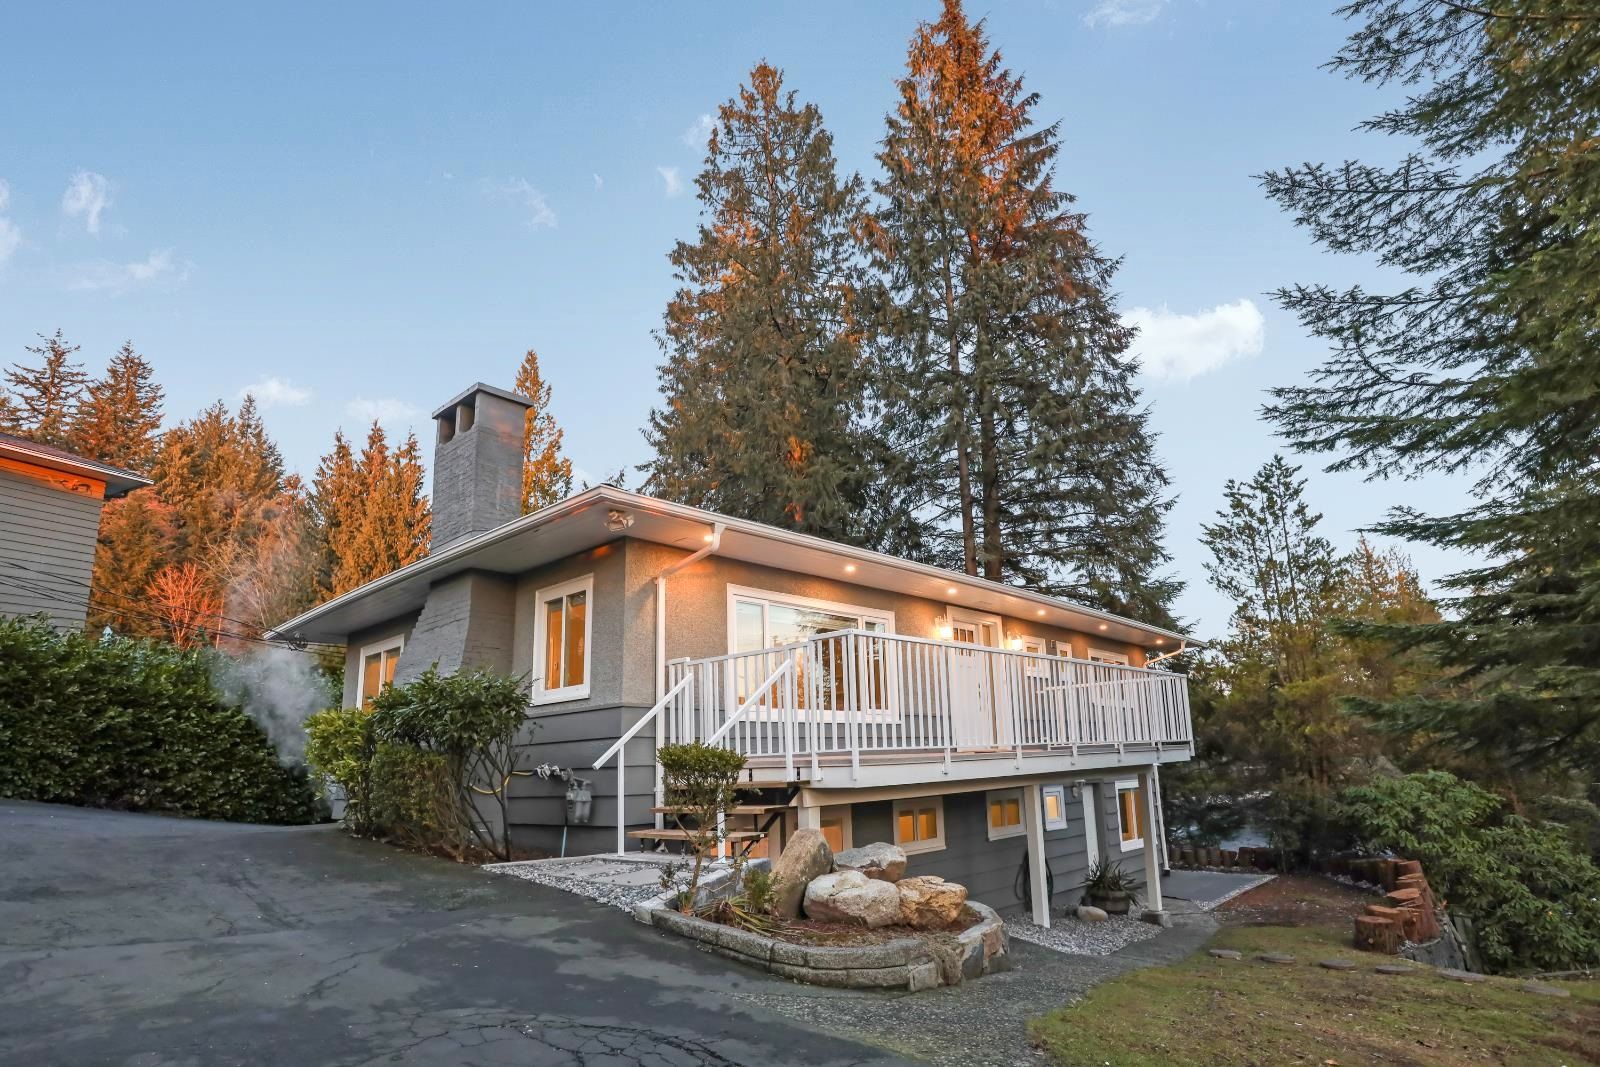 Main Photo: 414 E CARISBROOKE ROAD in : Upper Lonsdale House for sale : MLS®# R2648439